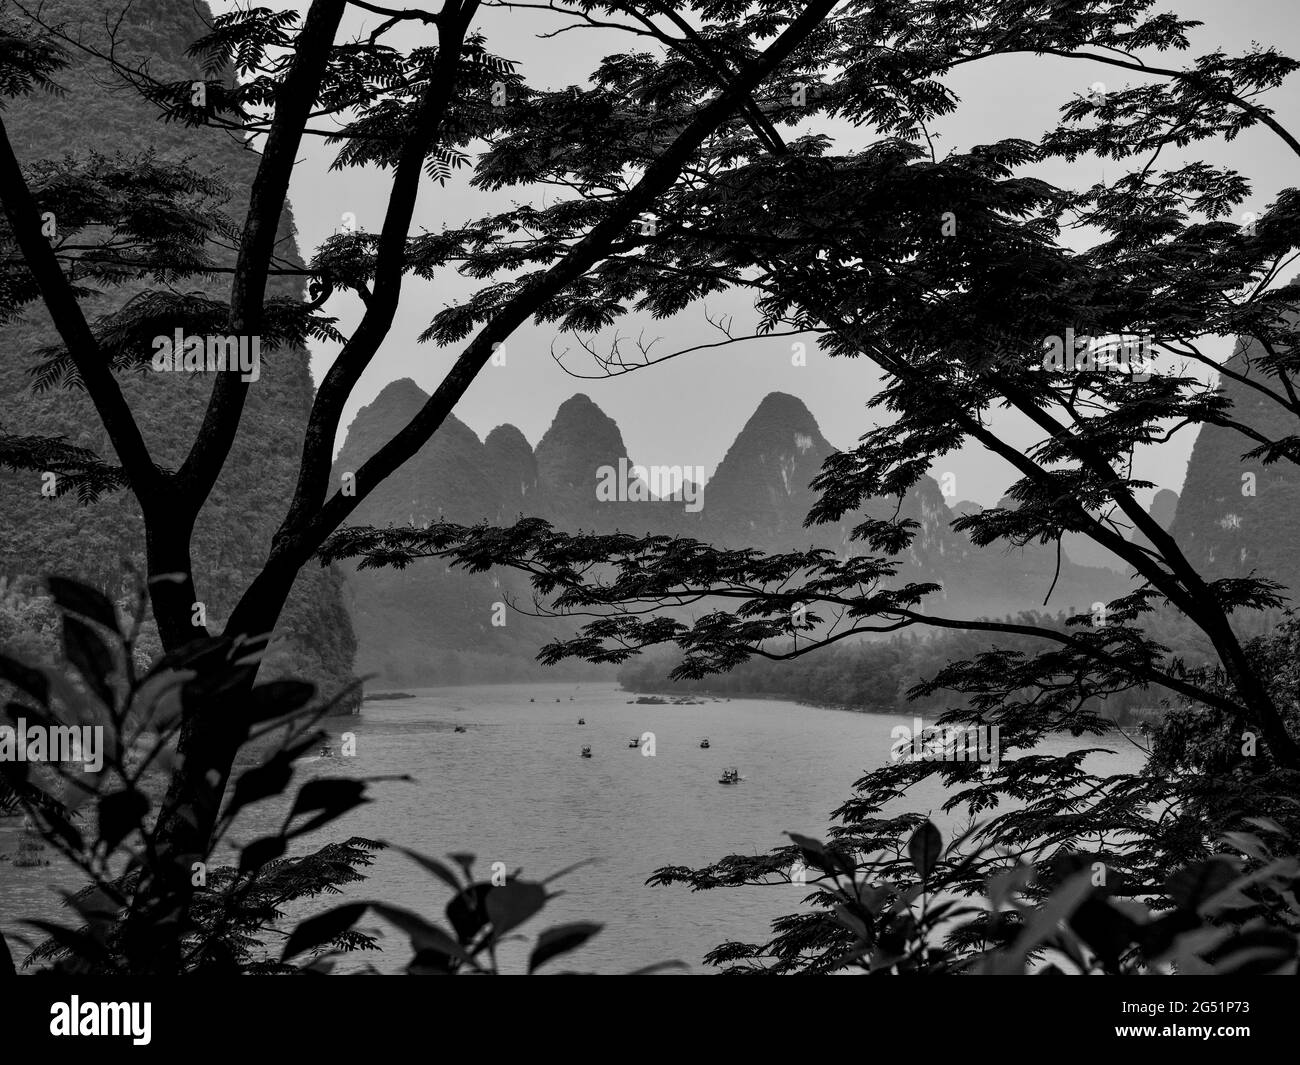 Black and white landscape with Li River and mountains, Xingping, Shaanxi province, China Stock Photo